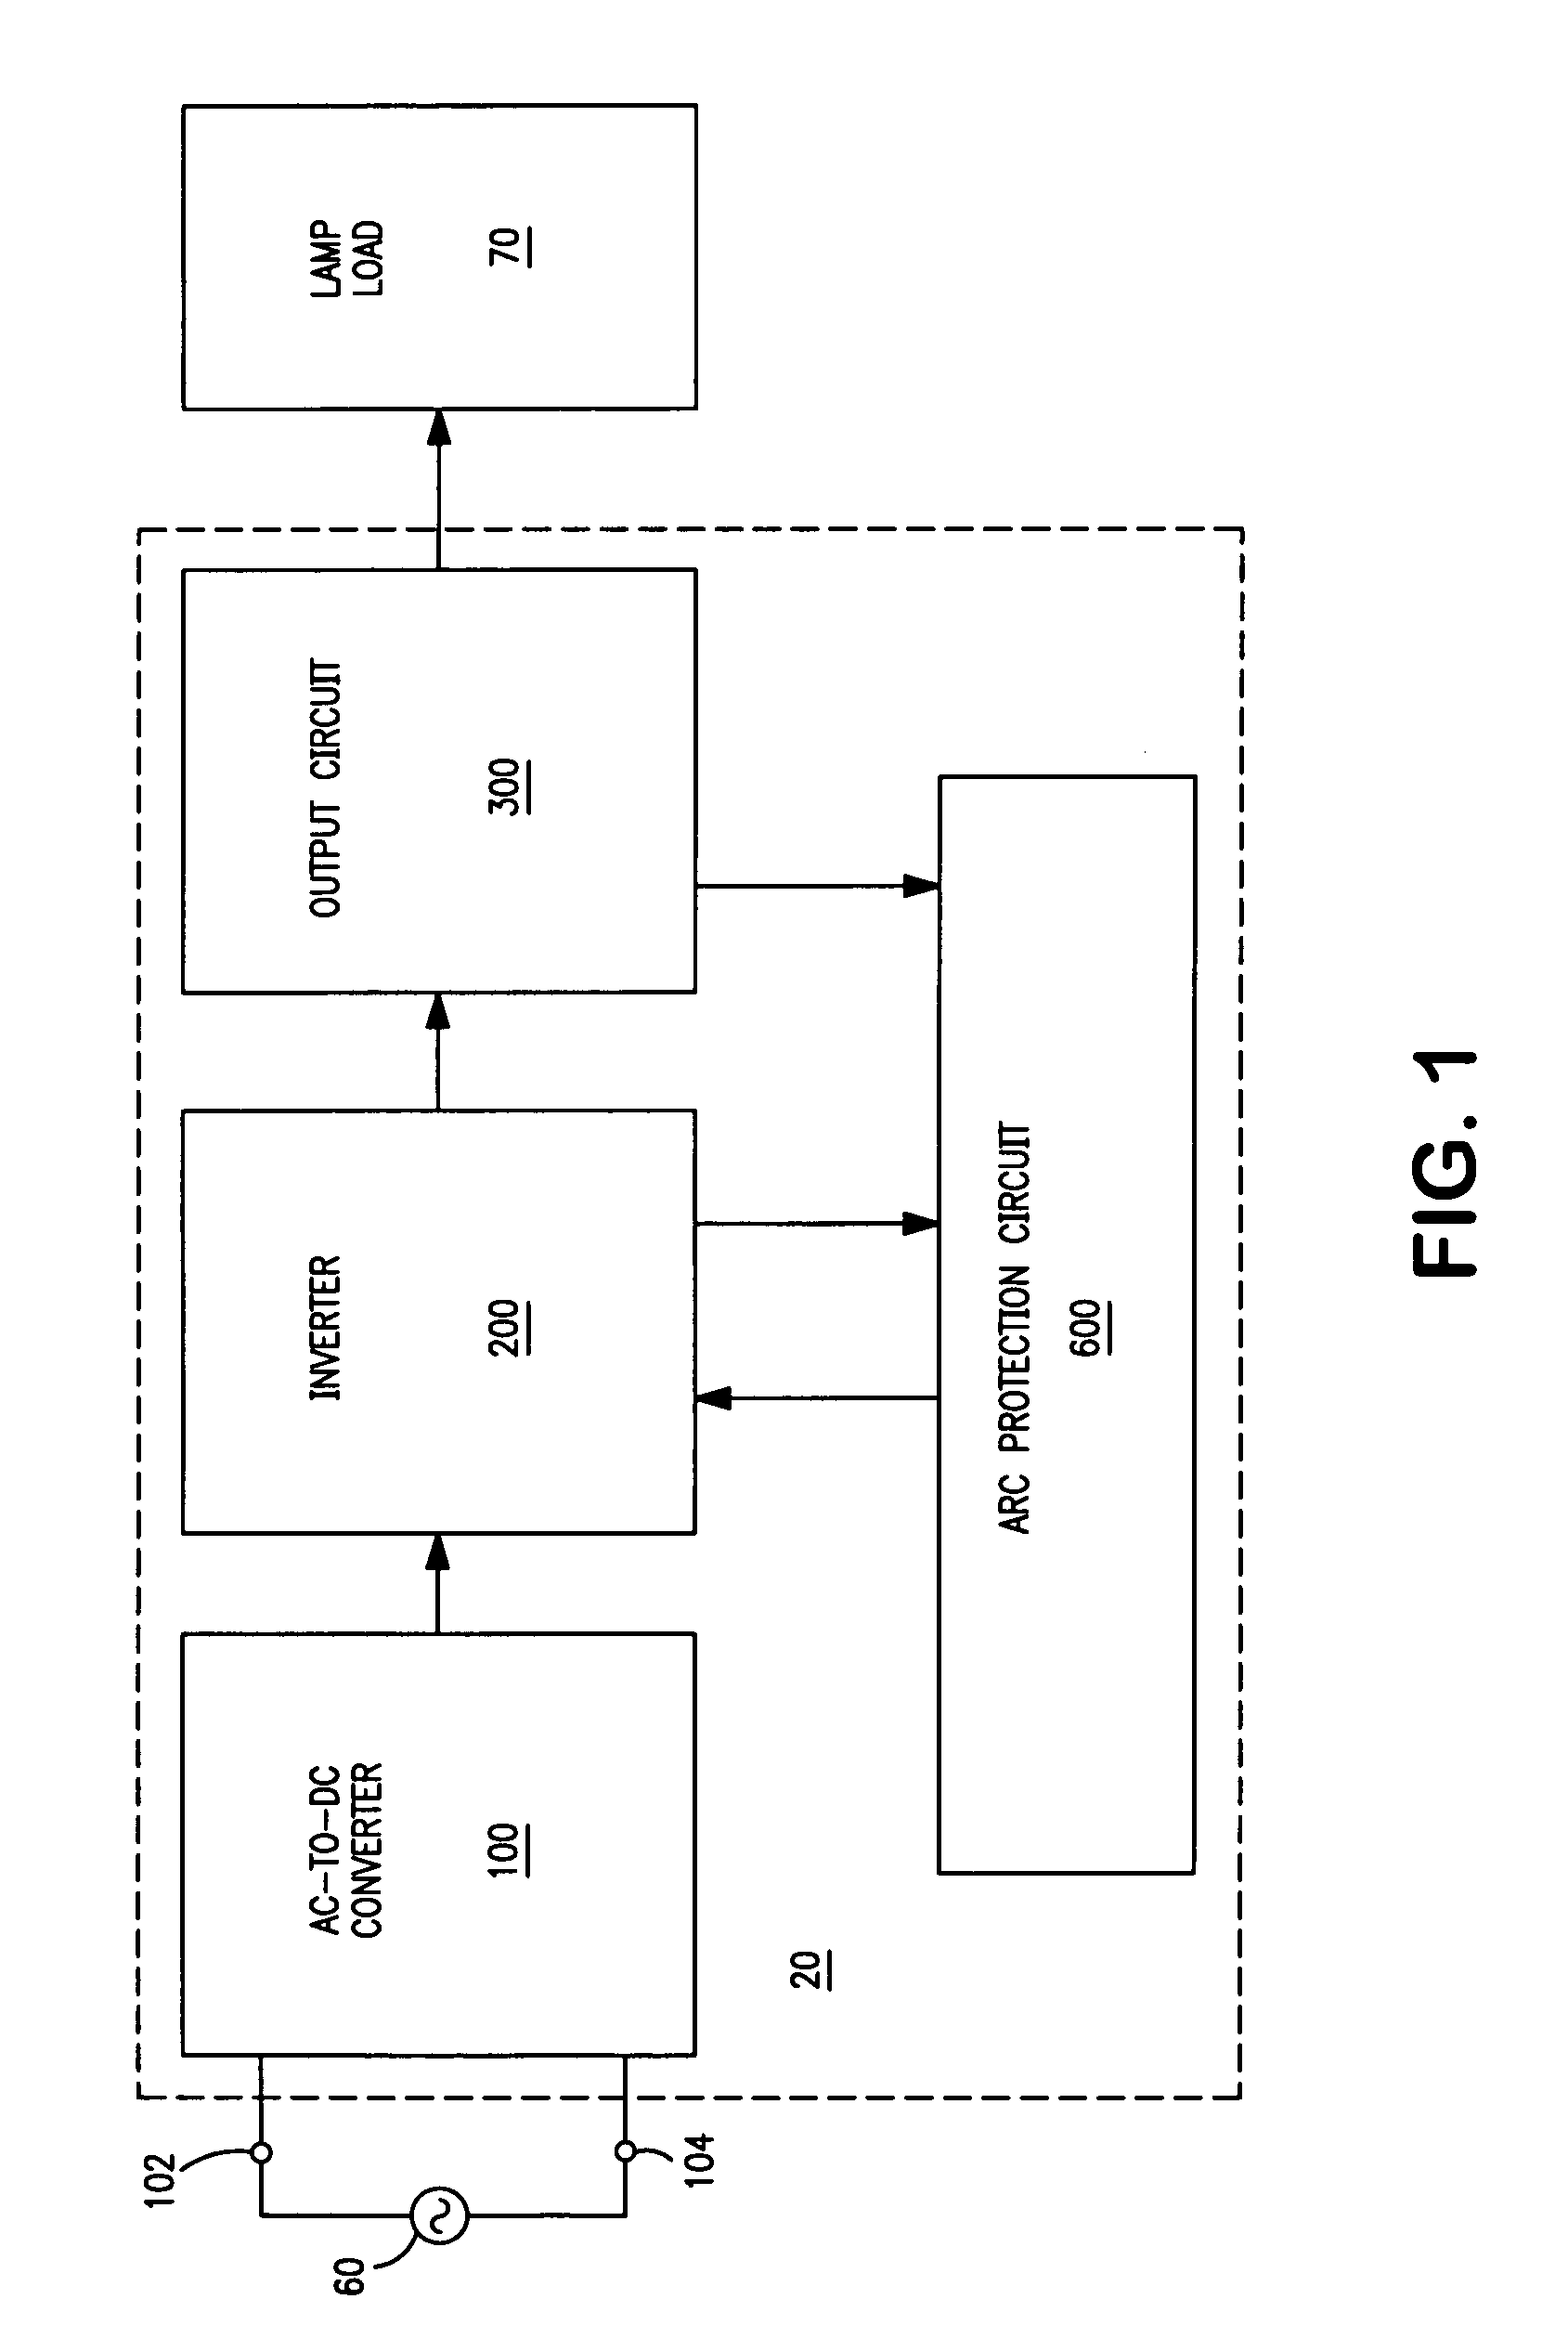 Ballast with arc protection circuit